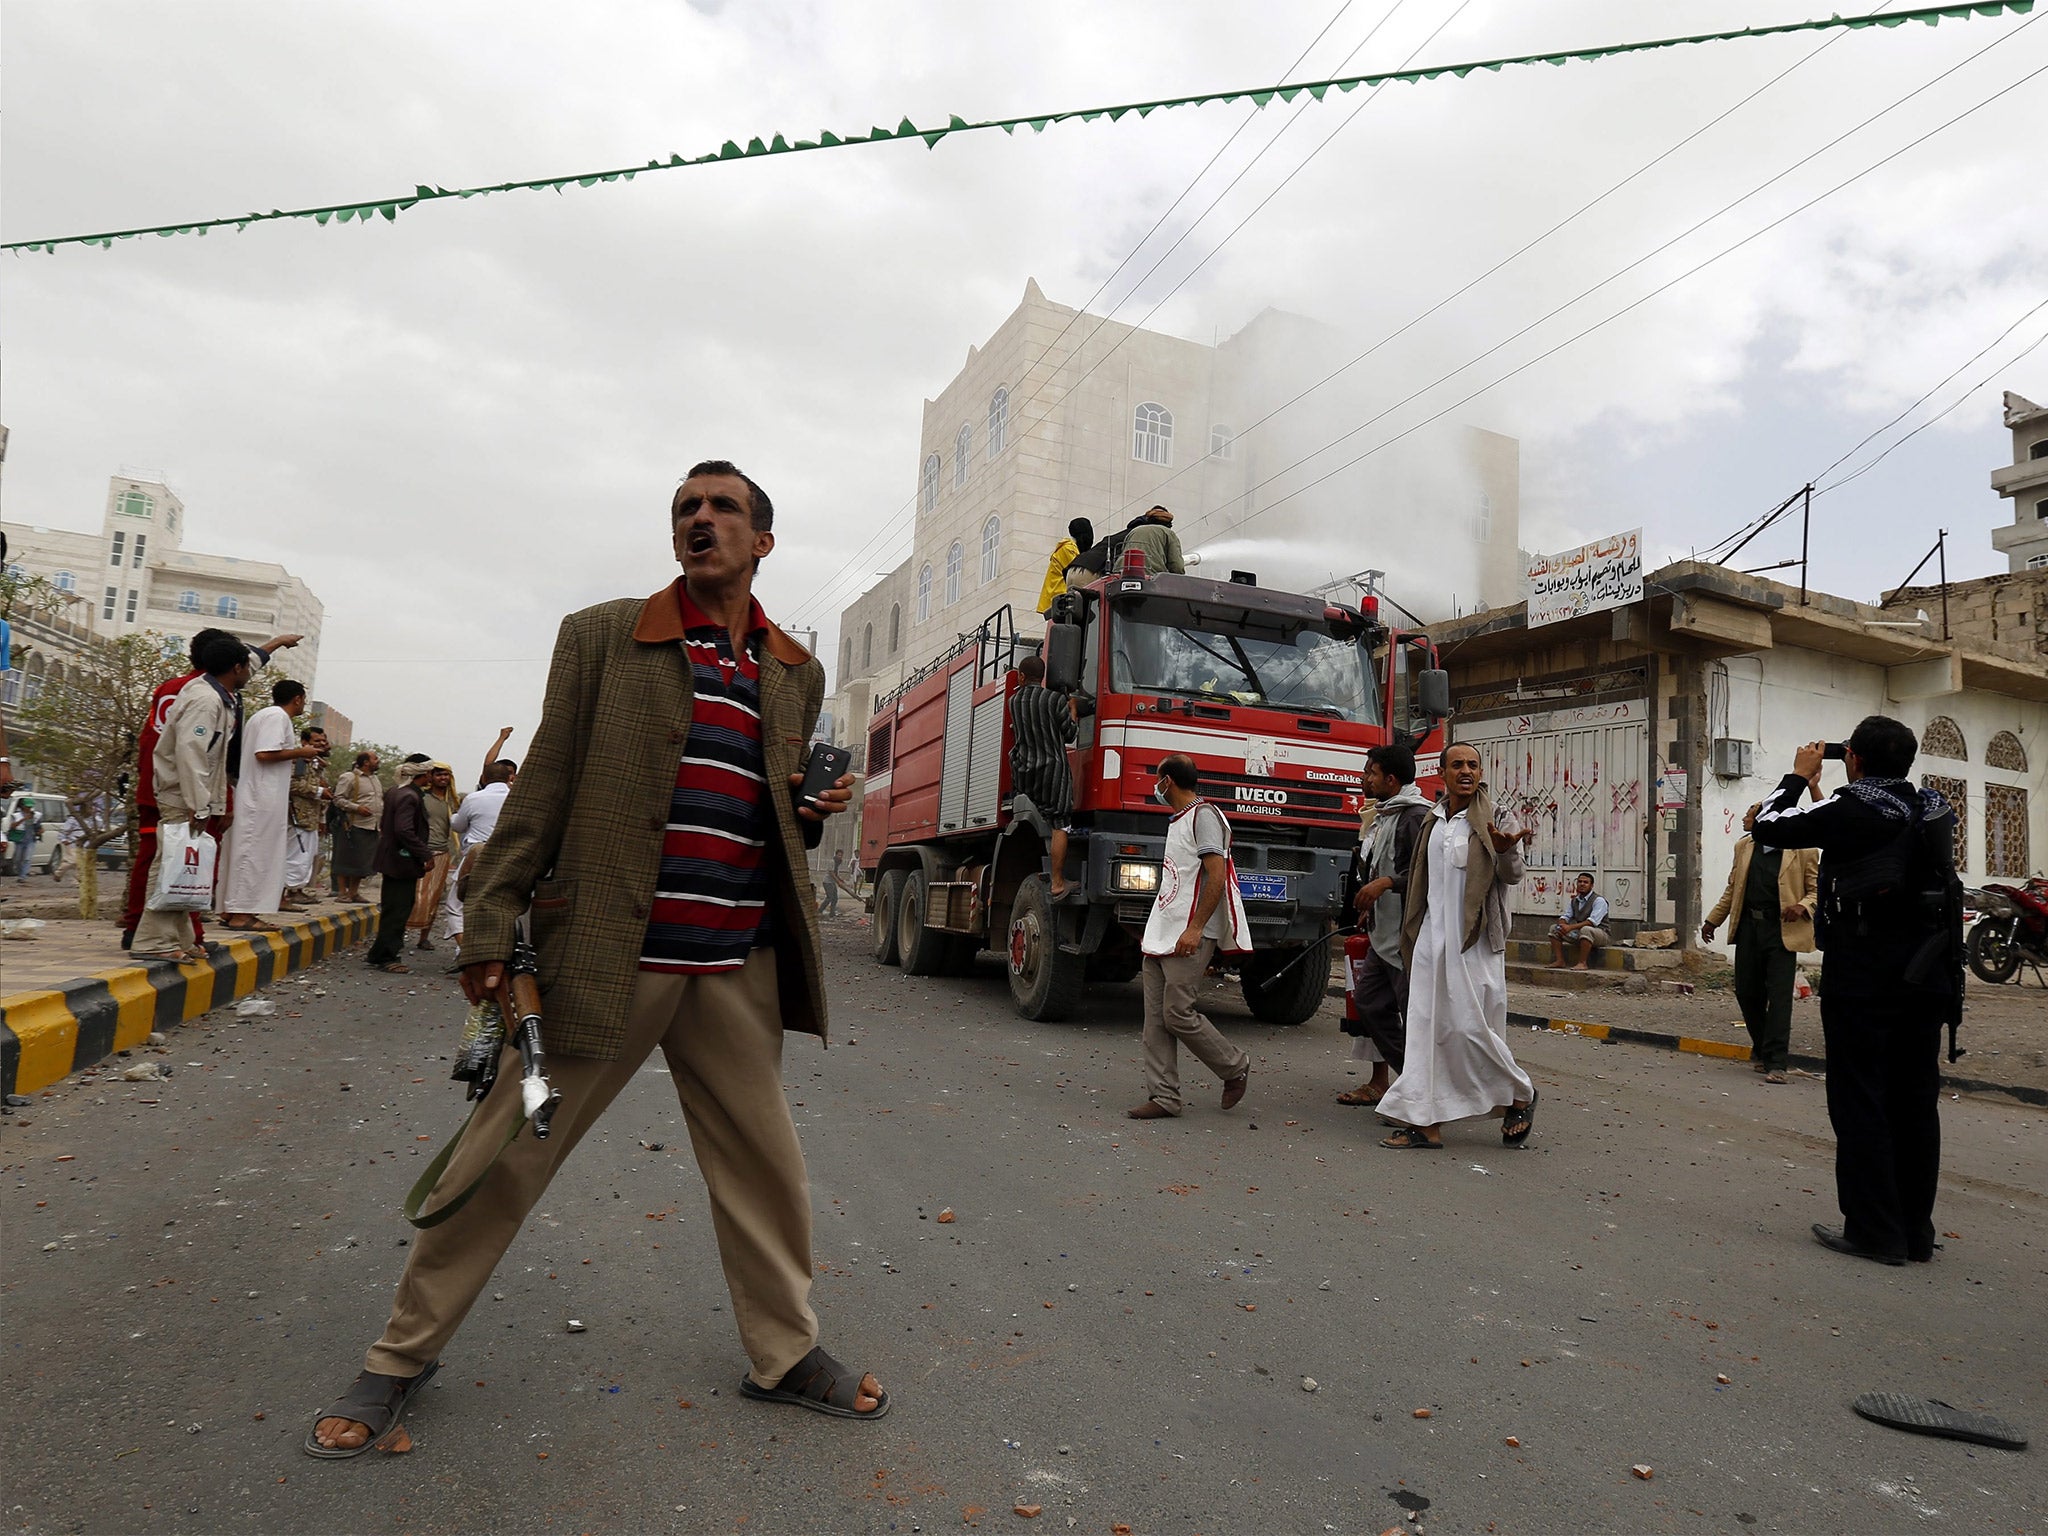 Yemenis gather at the scene of an air strike targeted at a Houthi area in Sanaa